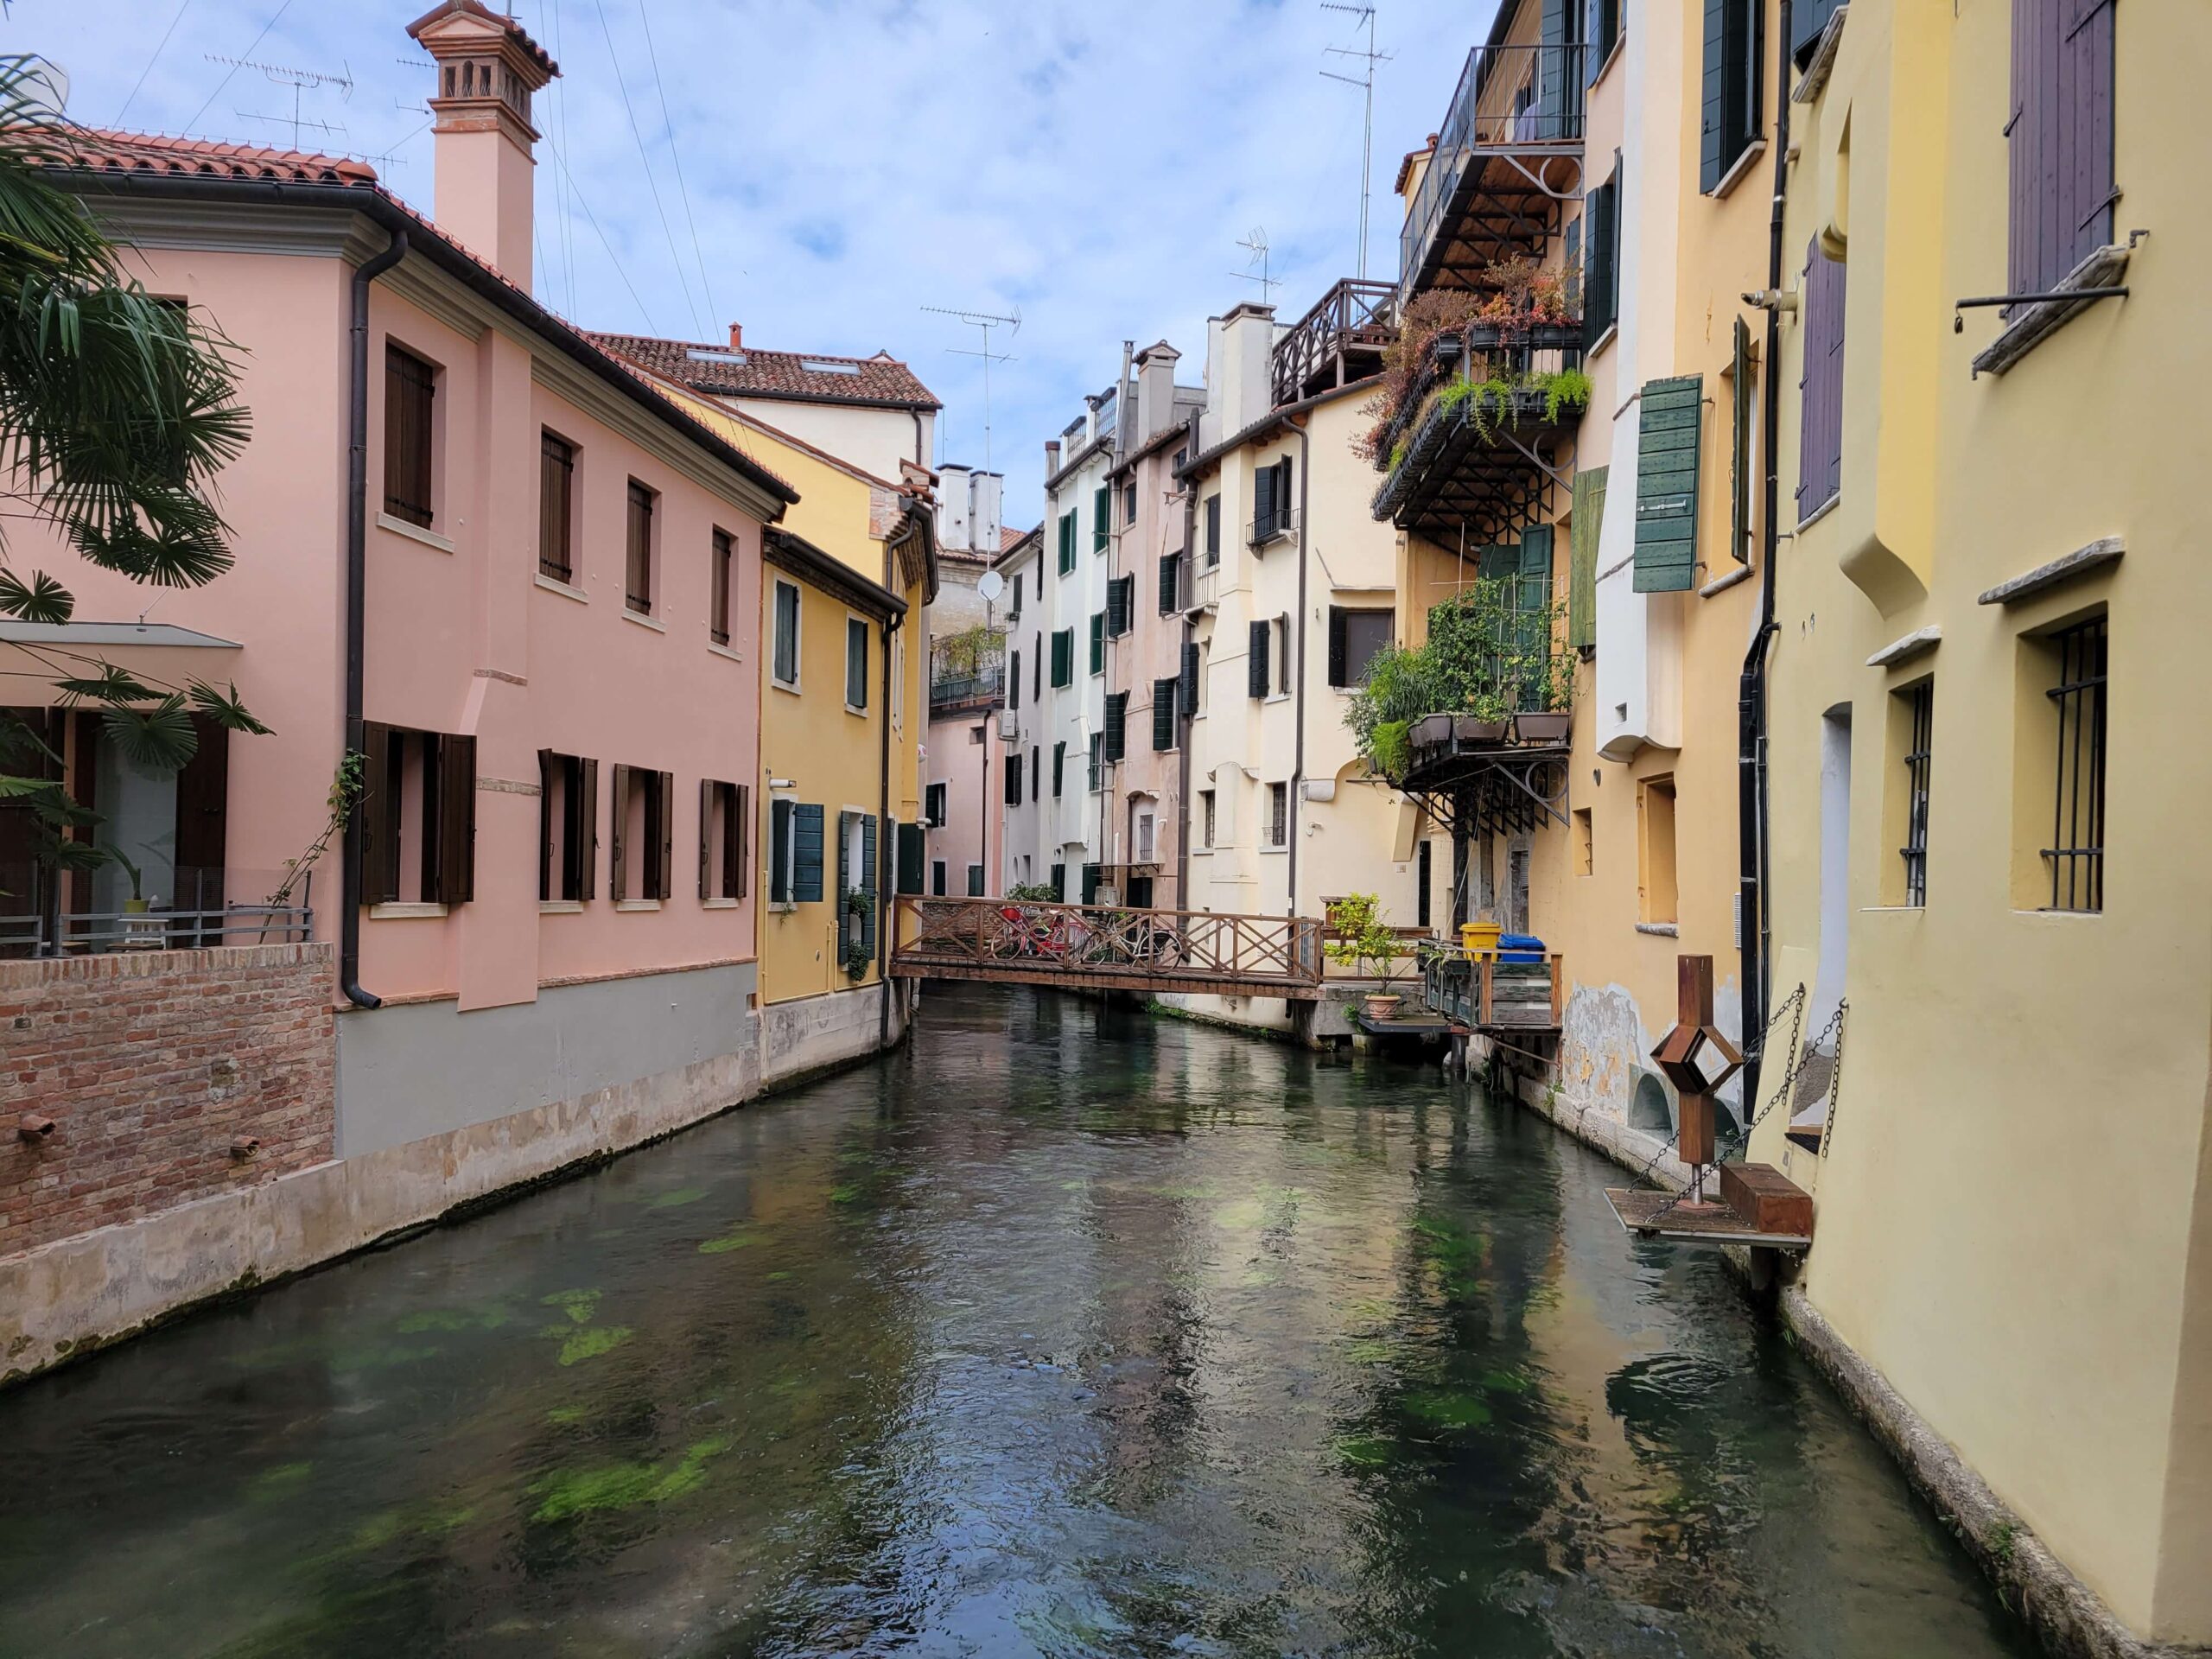 “Little Venice”-Travel Guide to Treviso, Italy